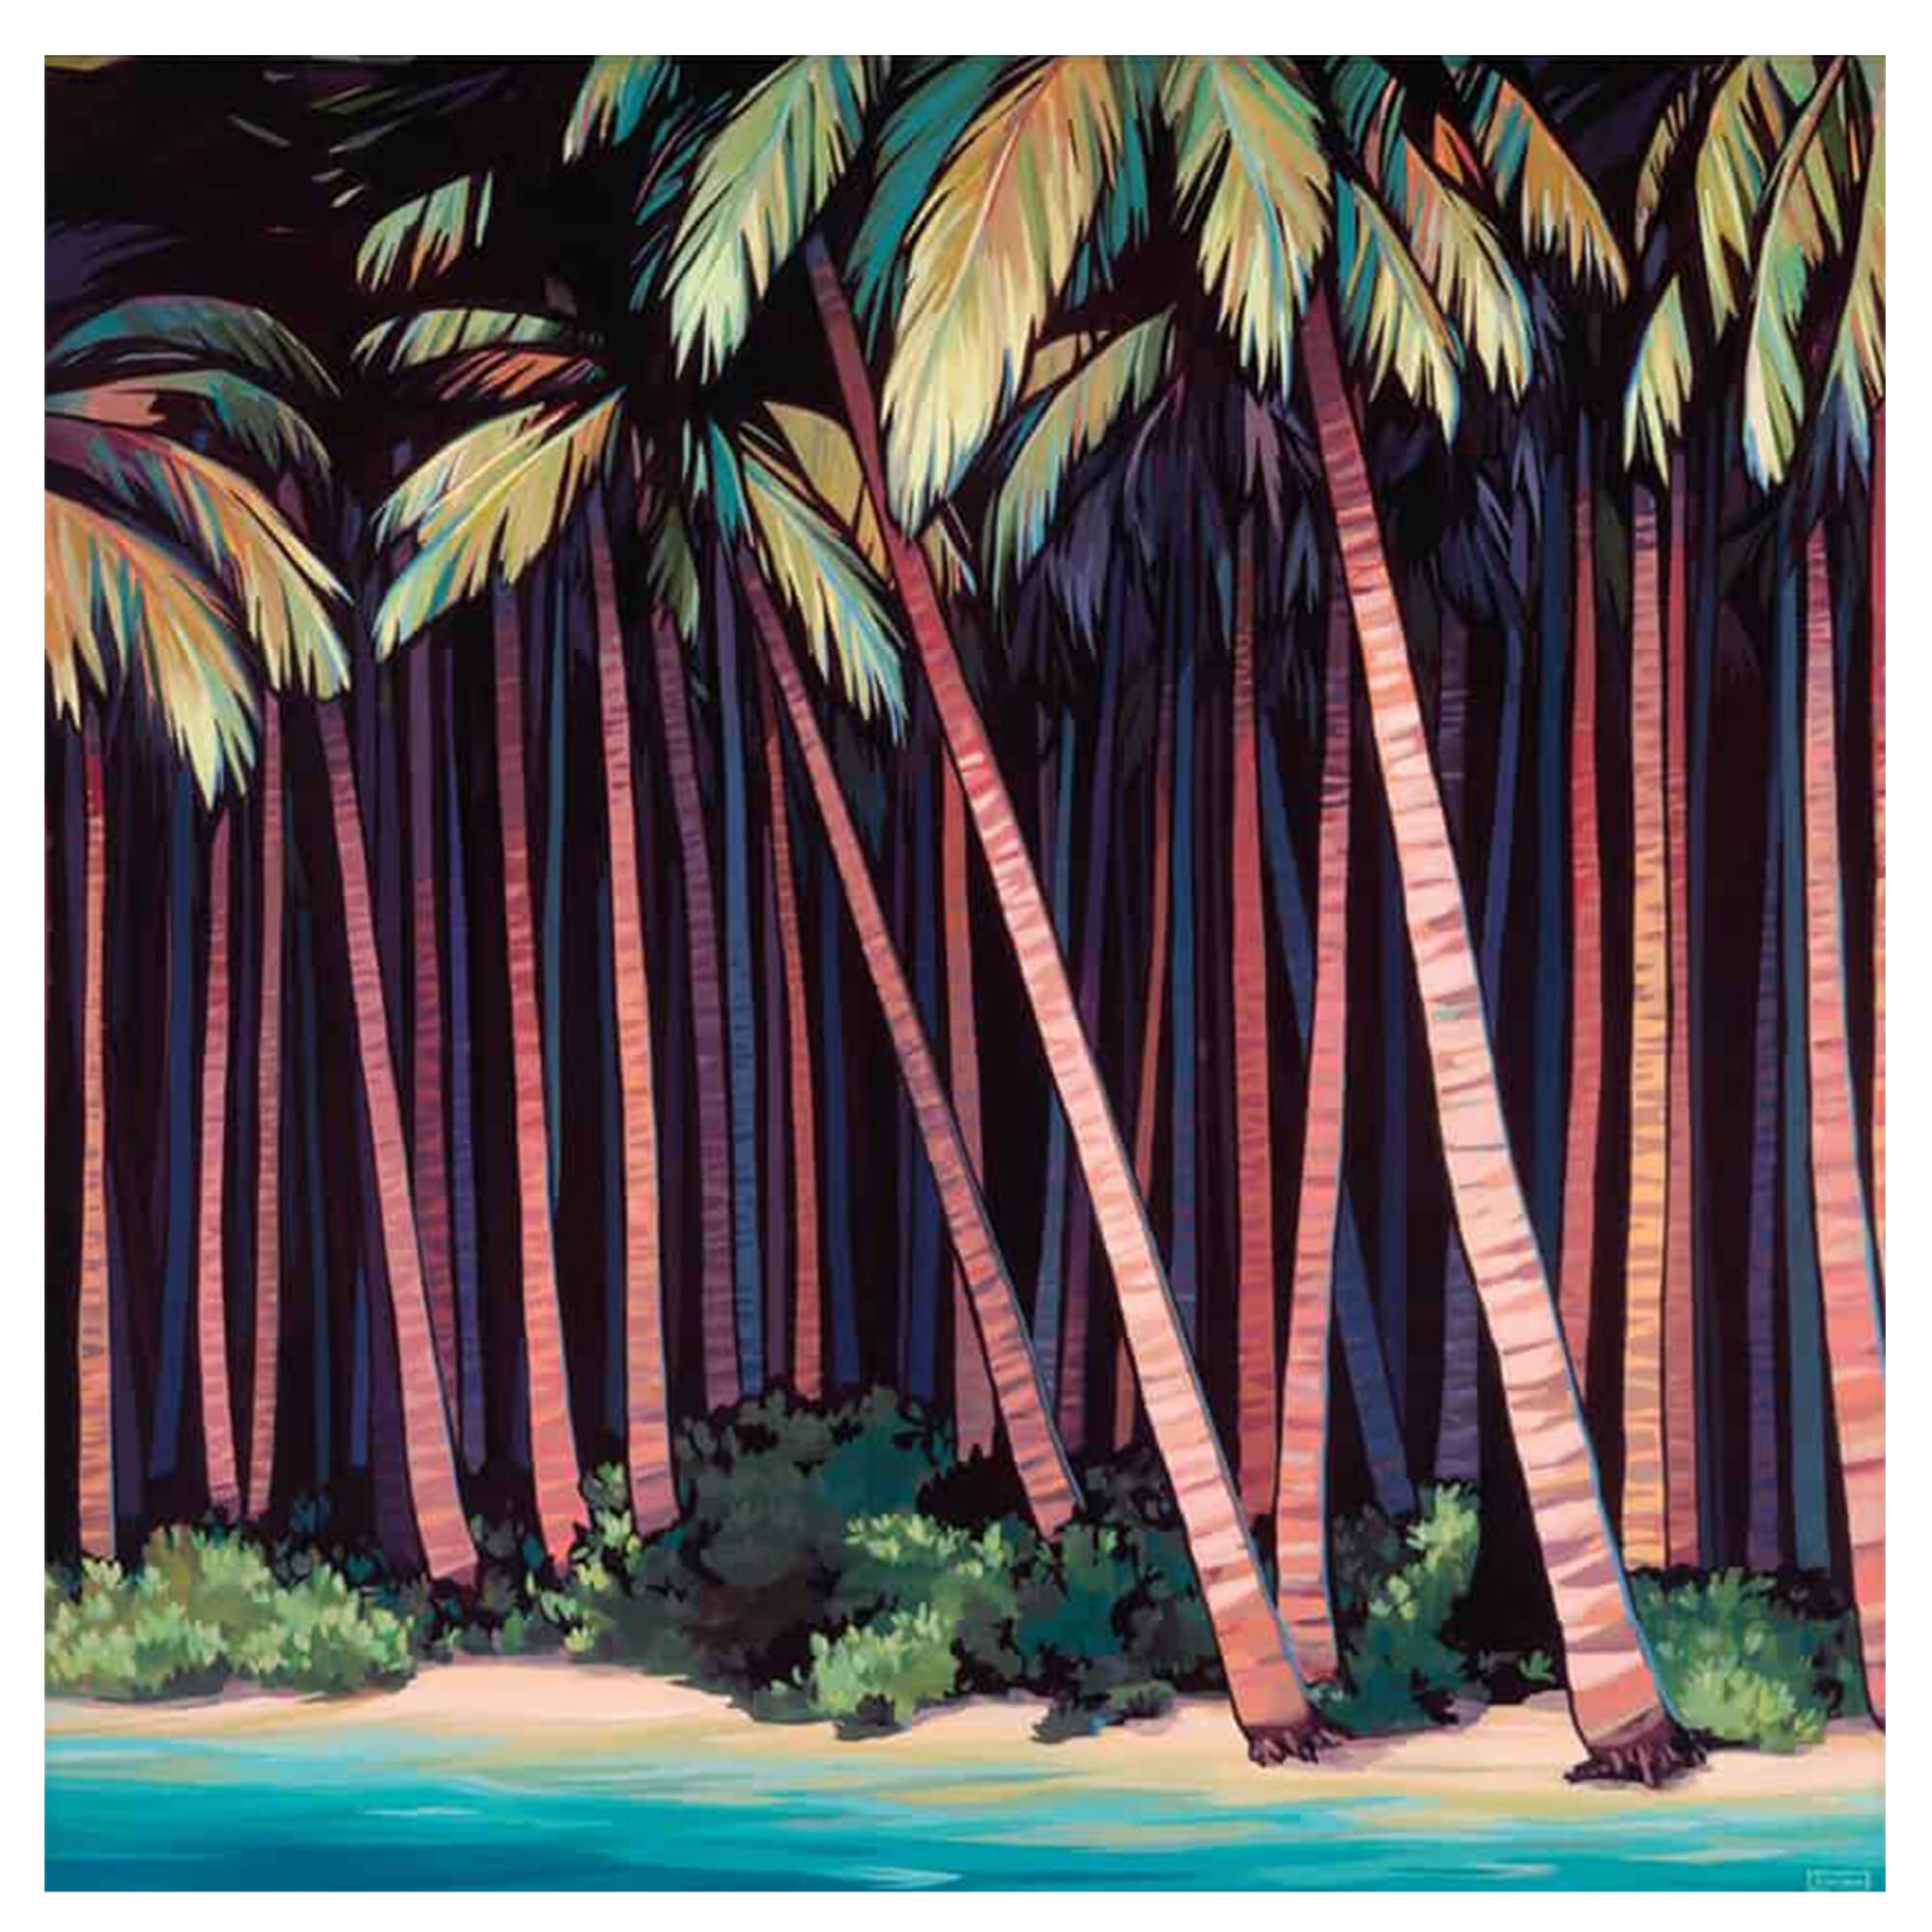 A matted print of the jungle of towering palm trees that line the shore of Kawela Bay by Hawaii artist Christie Shinn